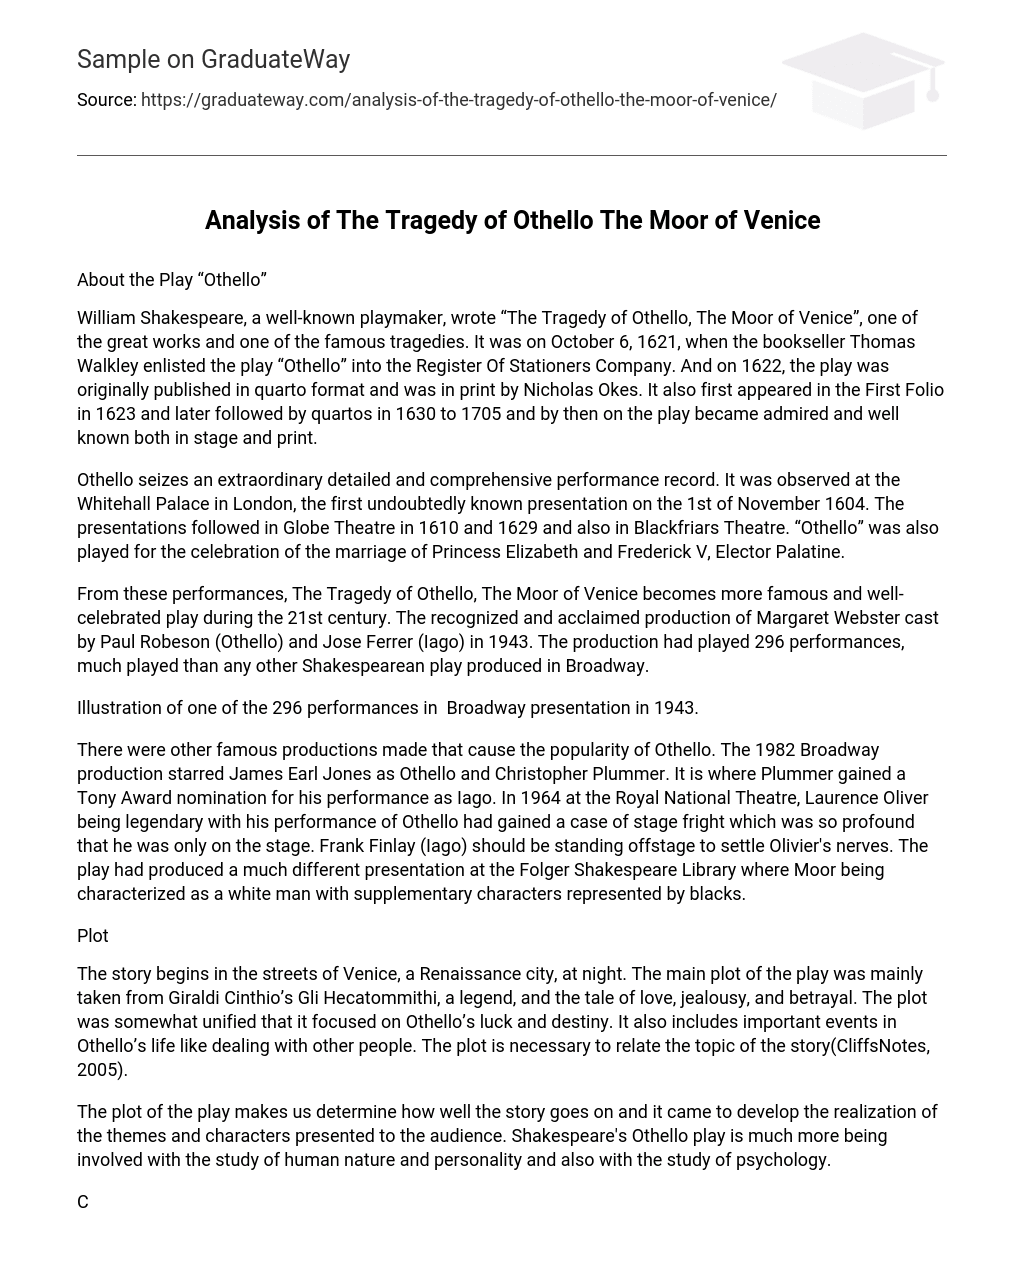 Analysis of The Tragedy of Othello The Moor of Venice